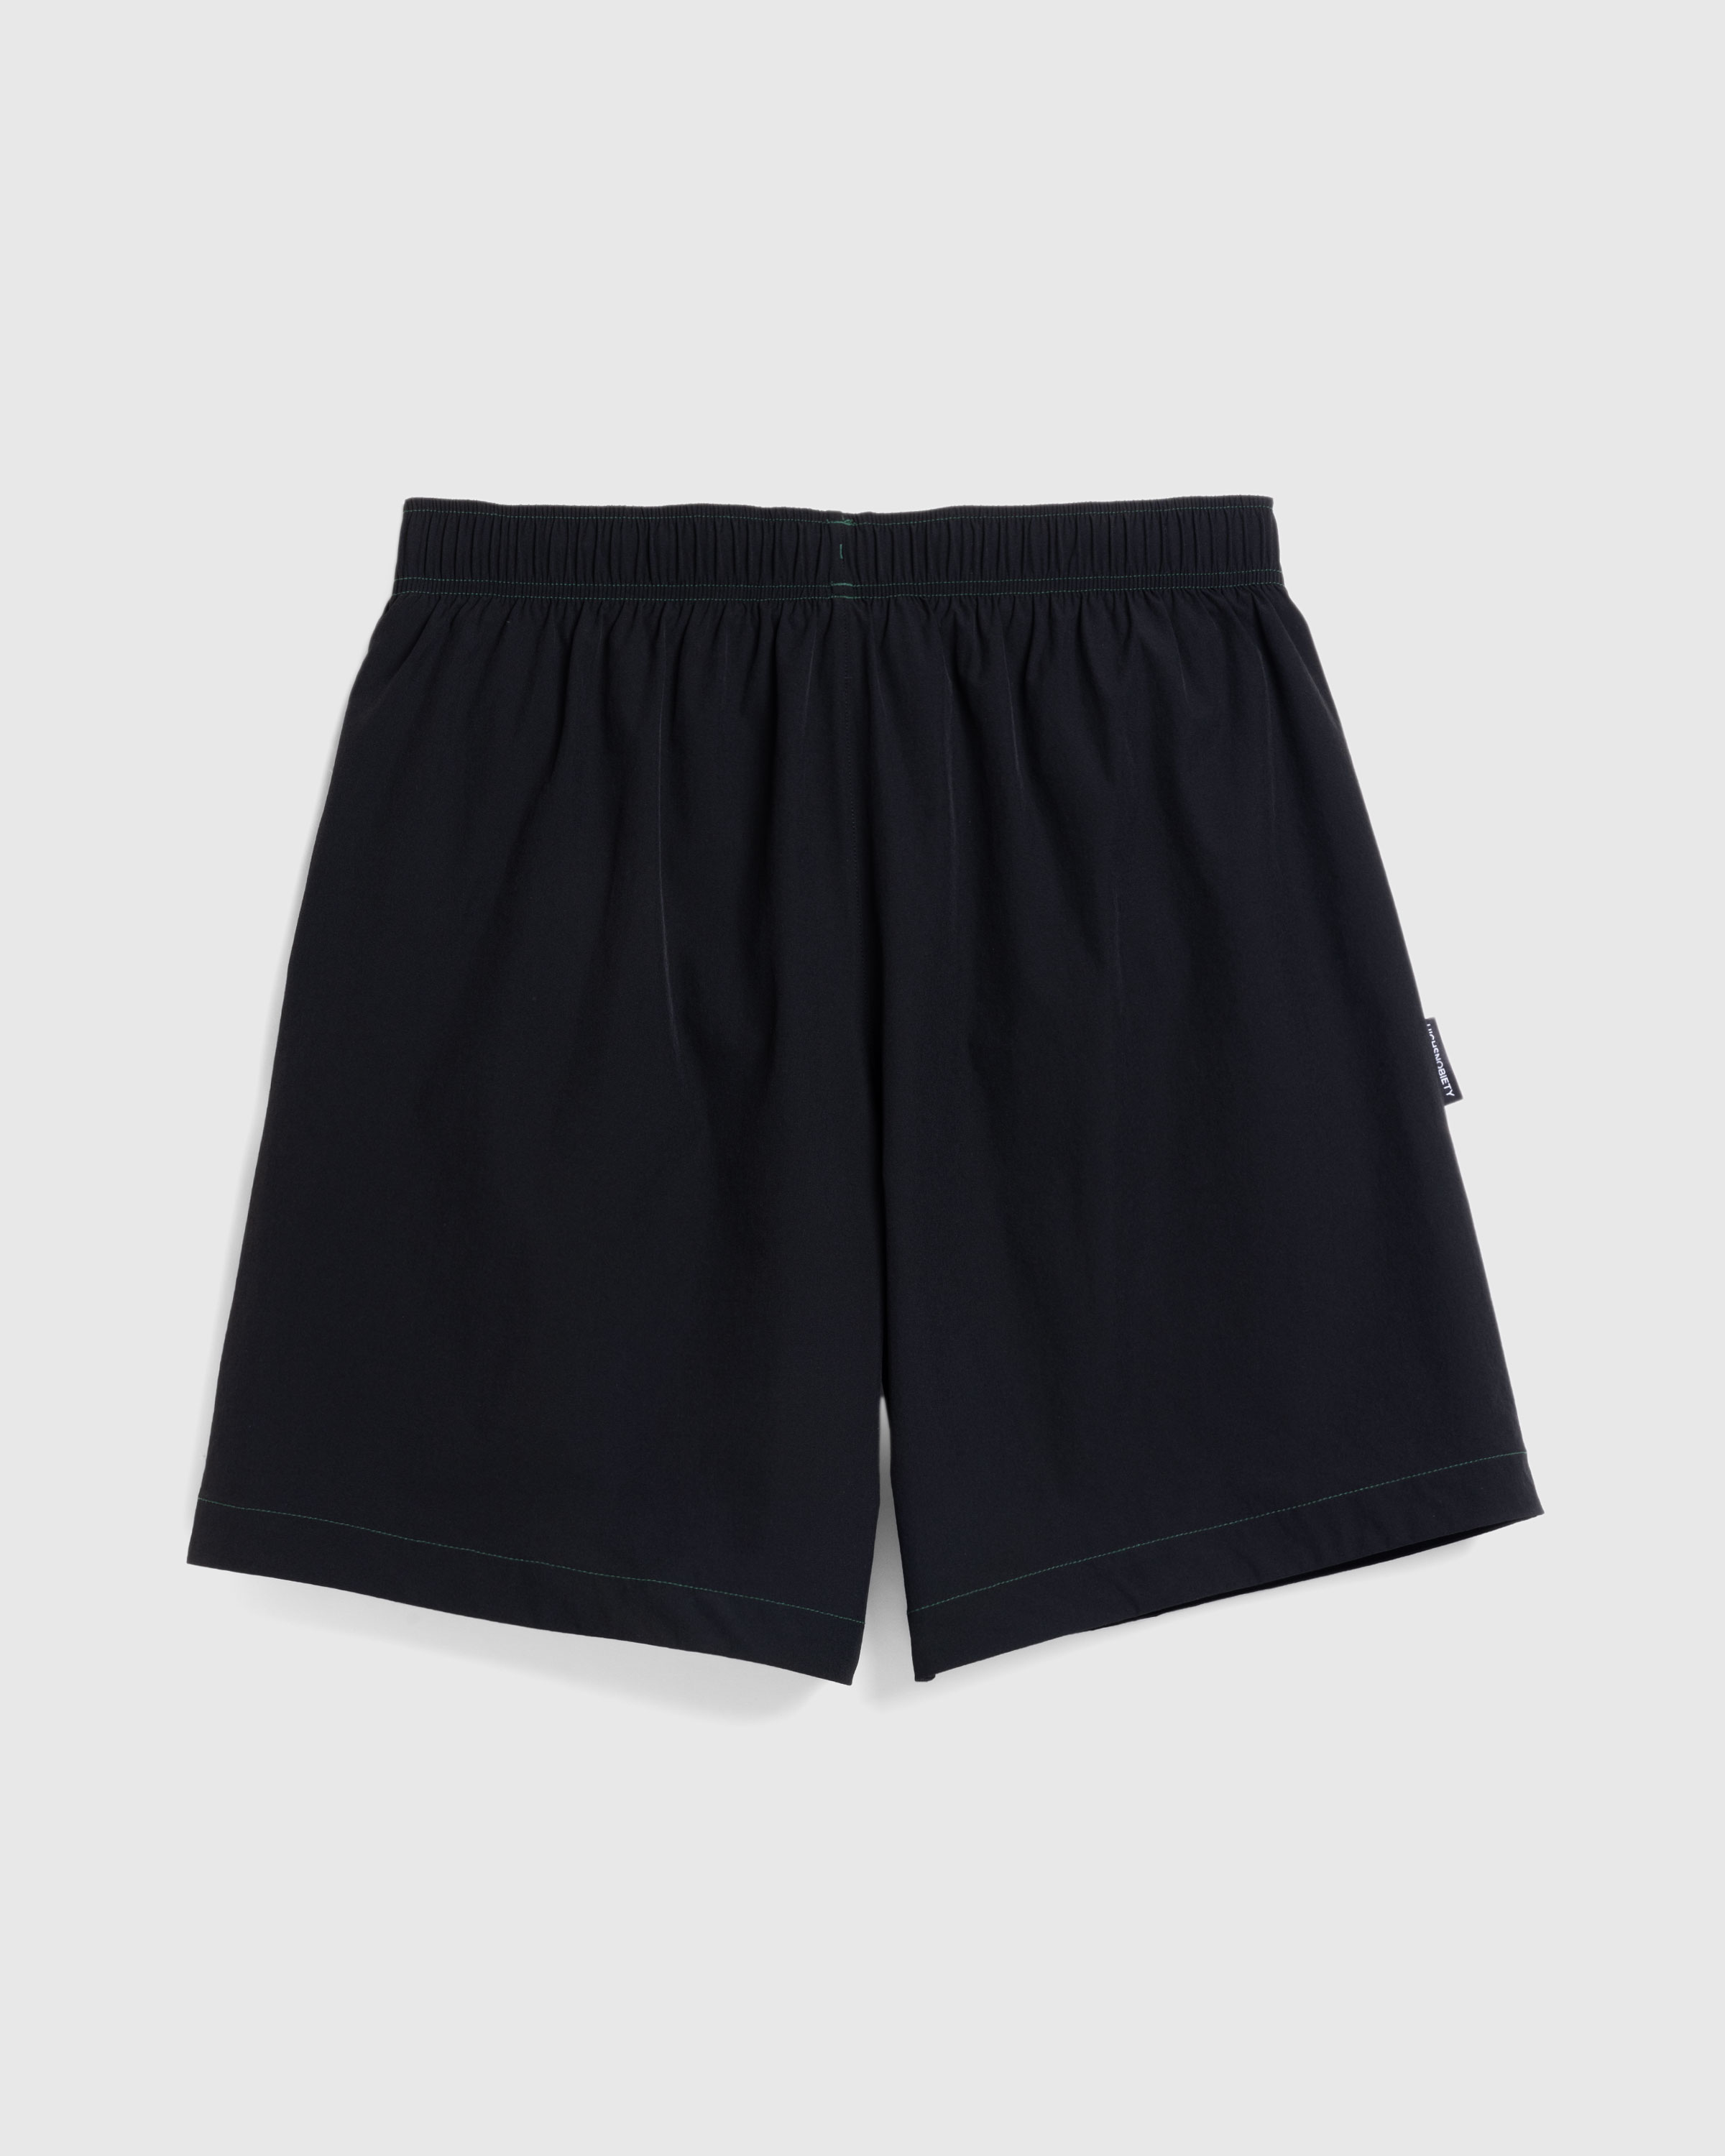 Lacoste x Highsnobiety – Not In Paris Tennis Shorts Black - Active Shorts - Sinople - Image 3